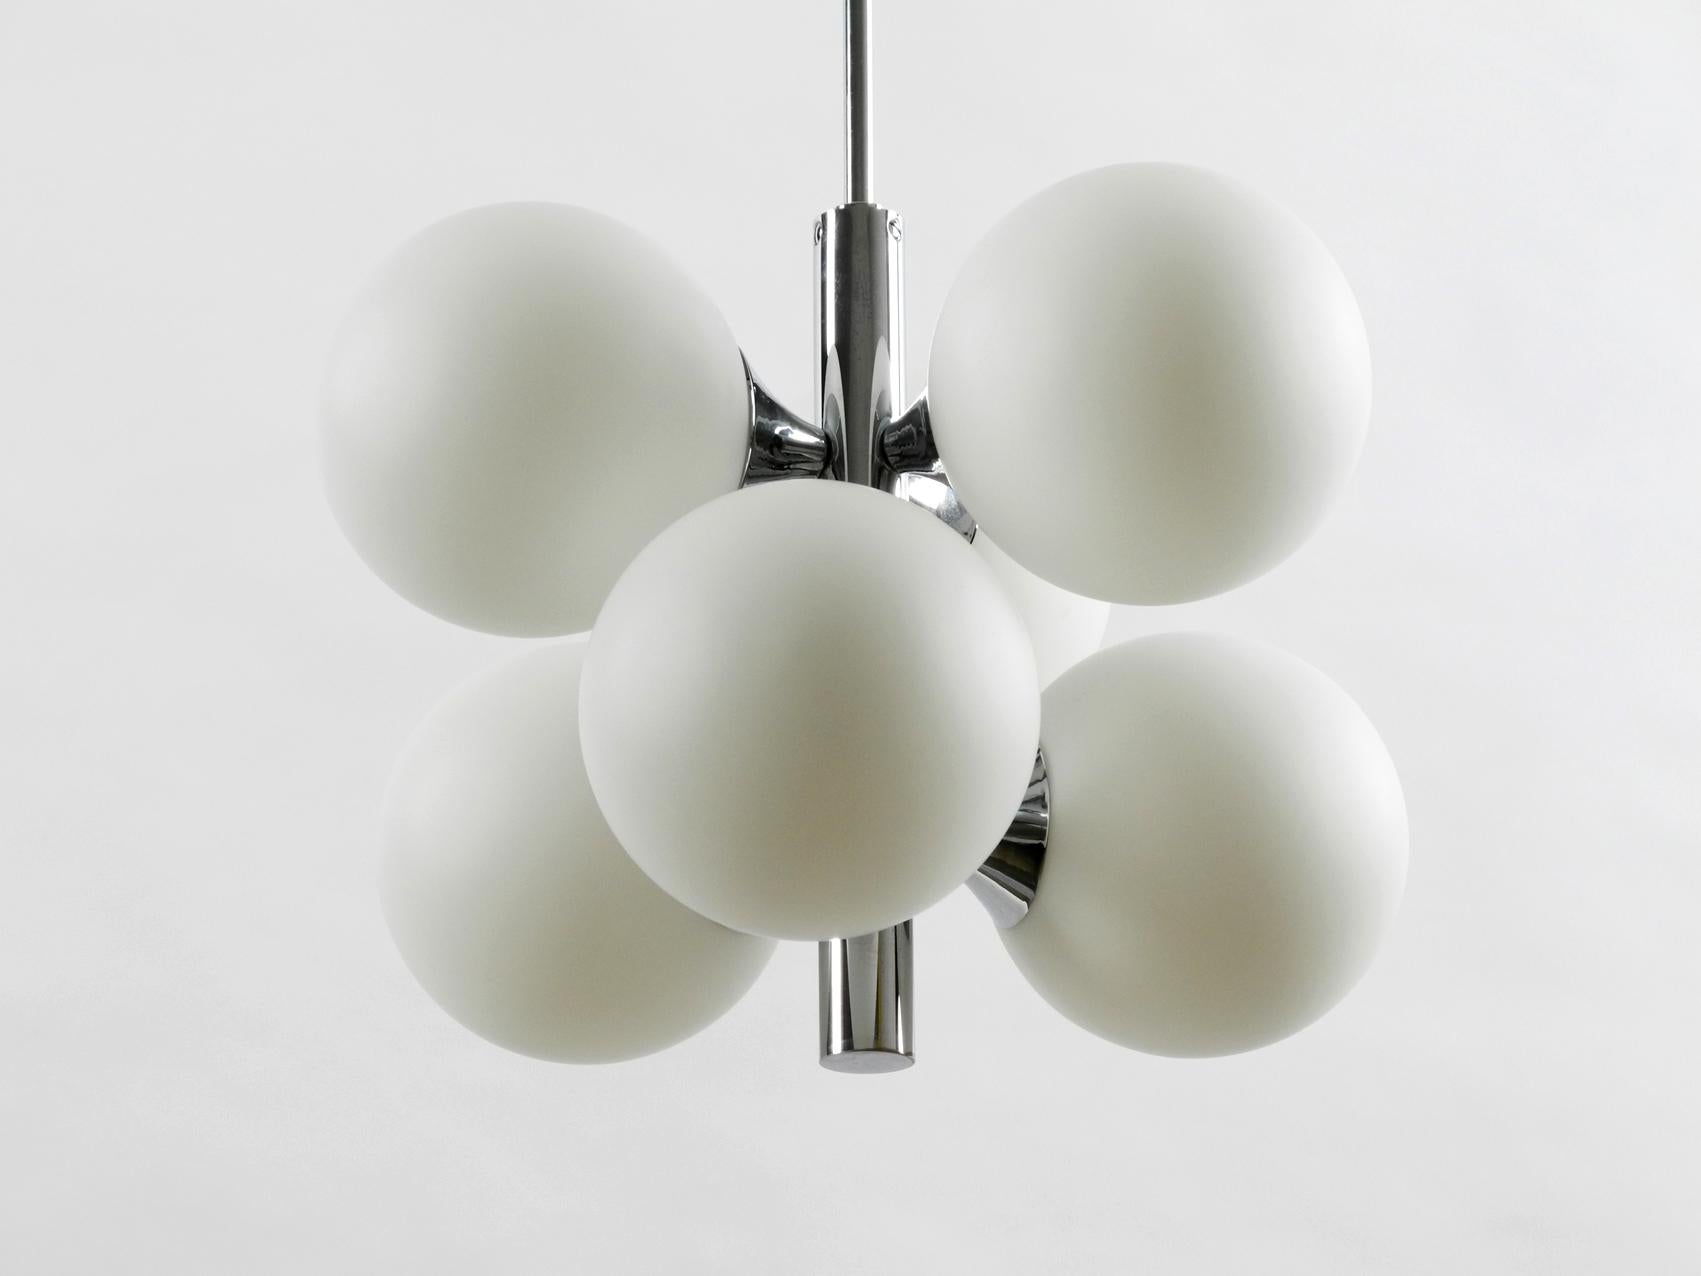 1960s Kaiser Chrome-Plated Metal Ceiling Lamp with 6 Opal Glass Balls Sp 1